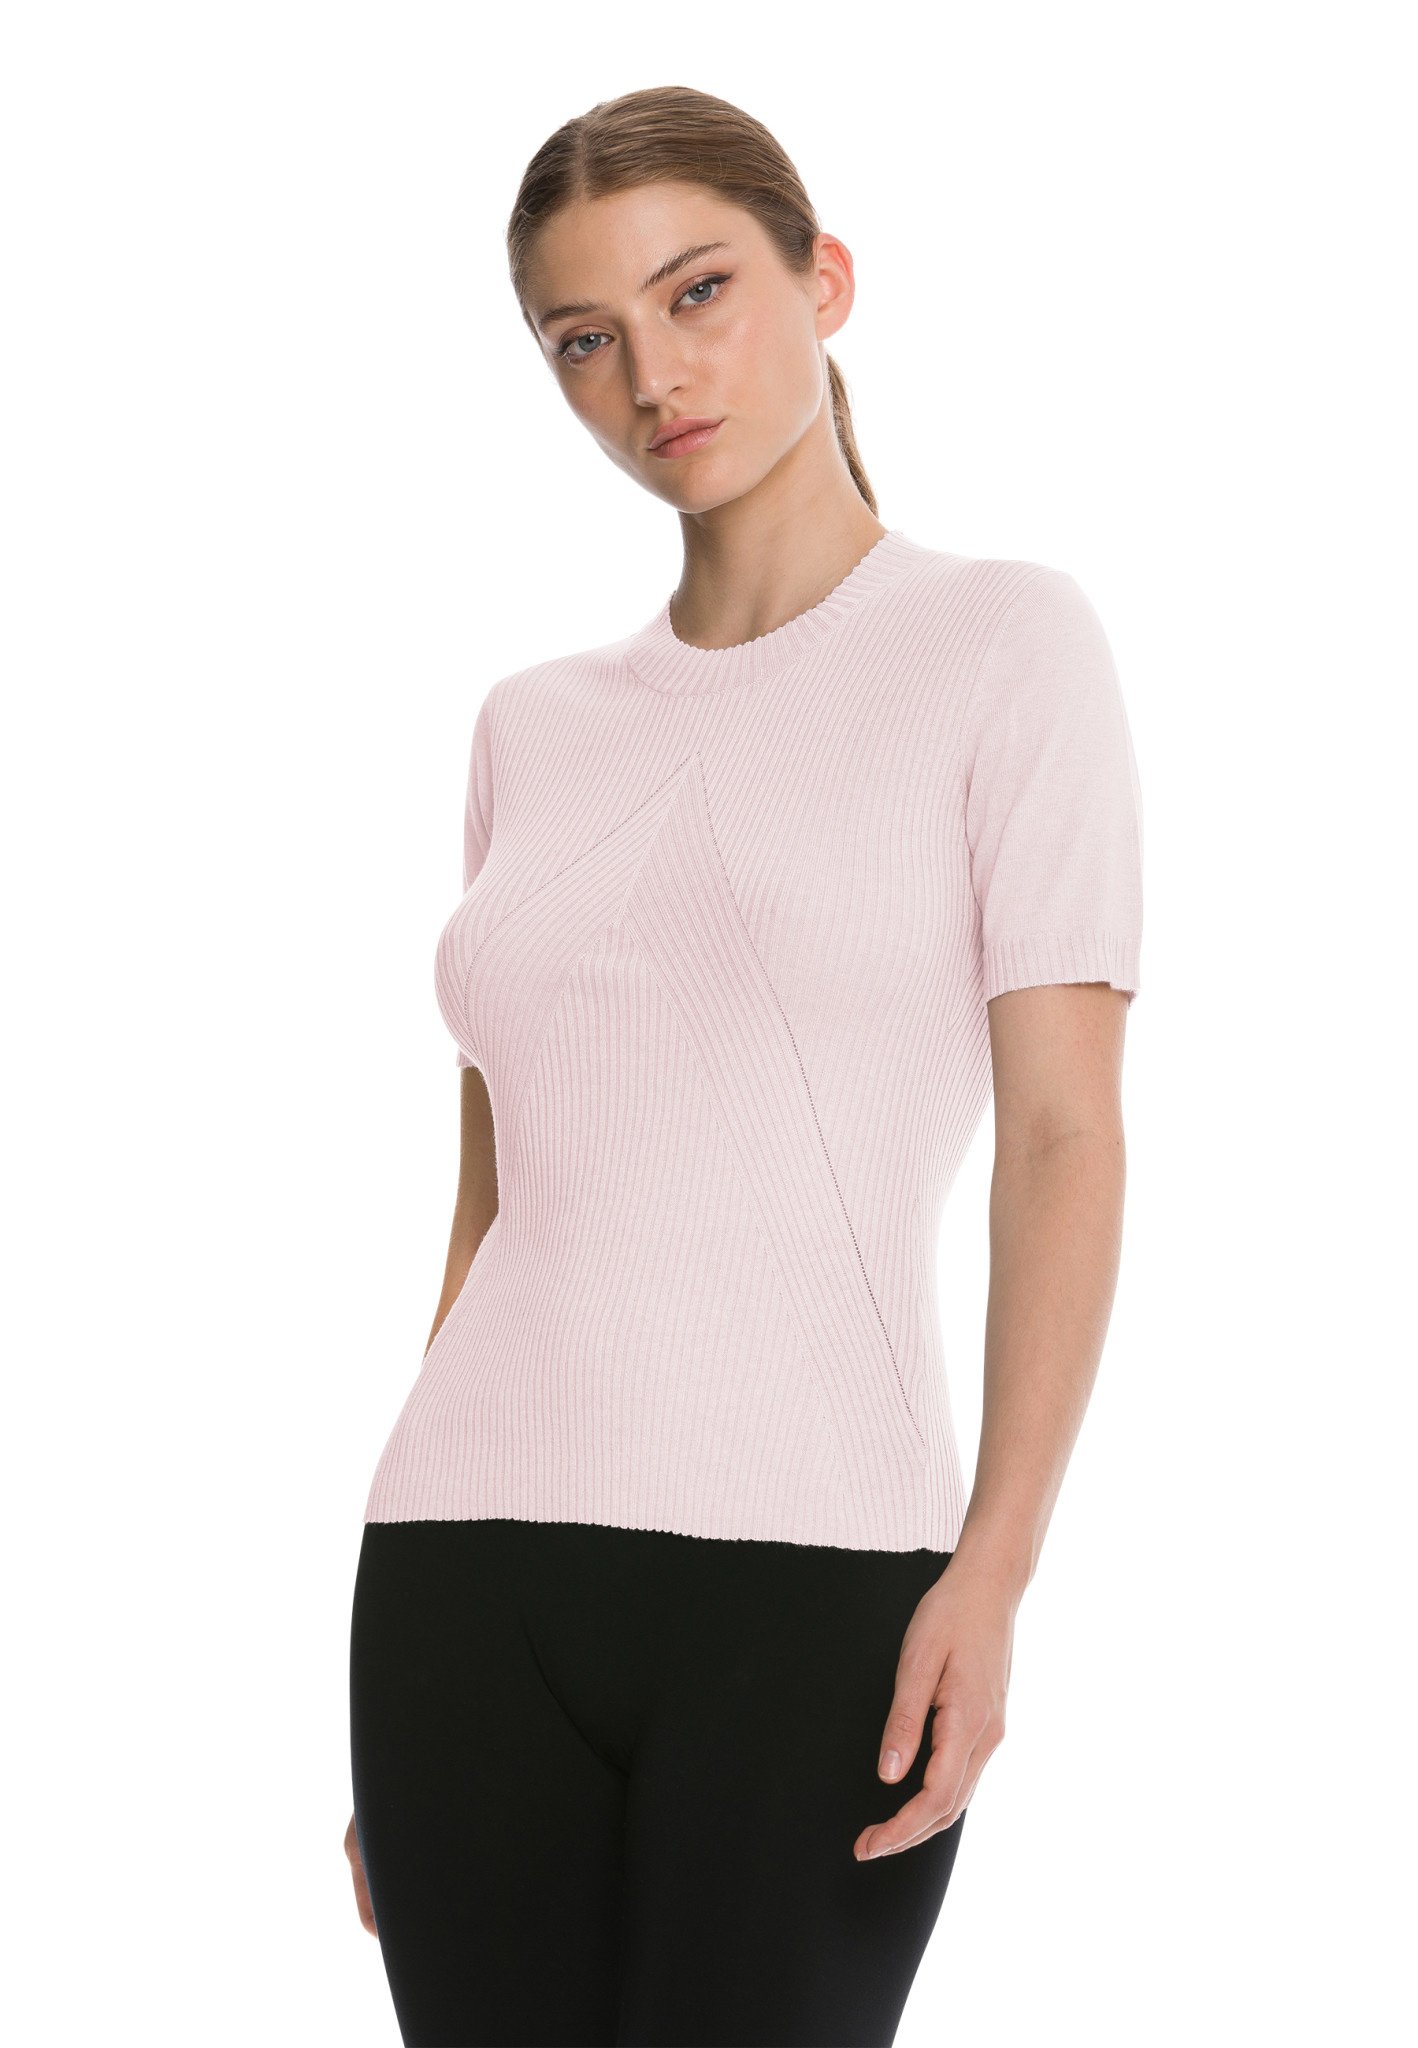 52917 Cashmere A Shape Top Long Sleeves